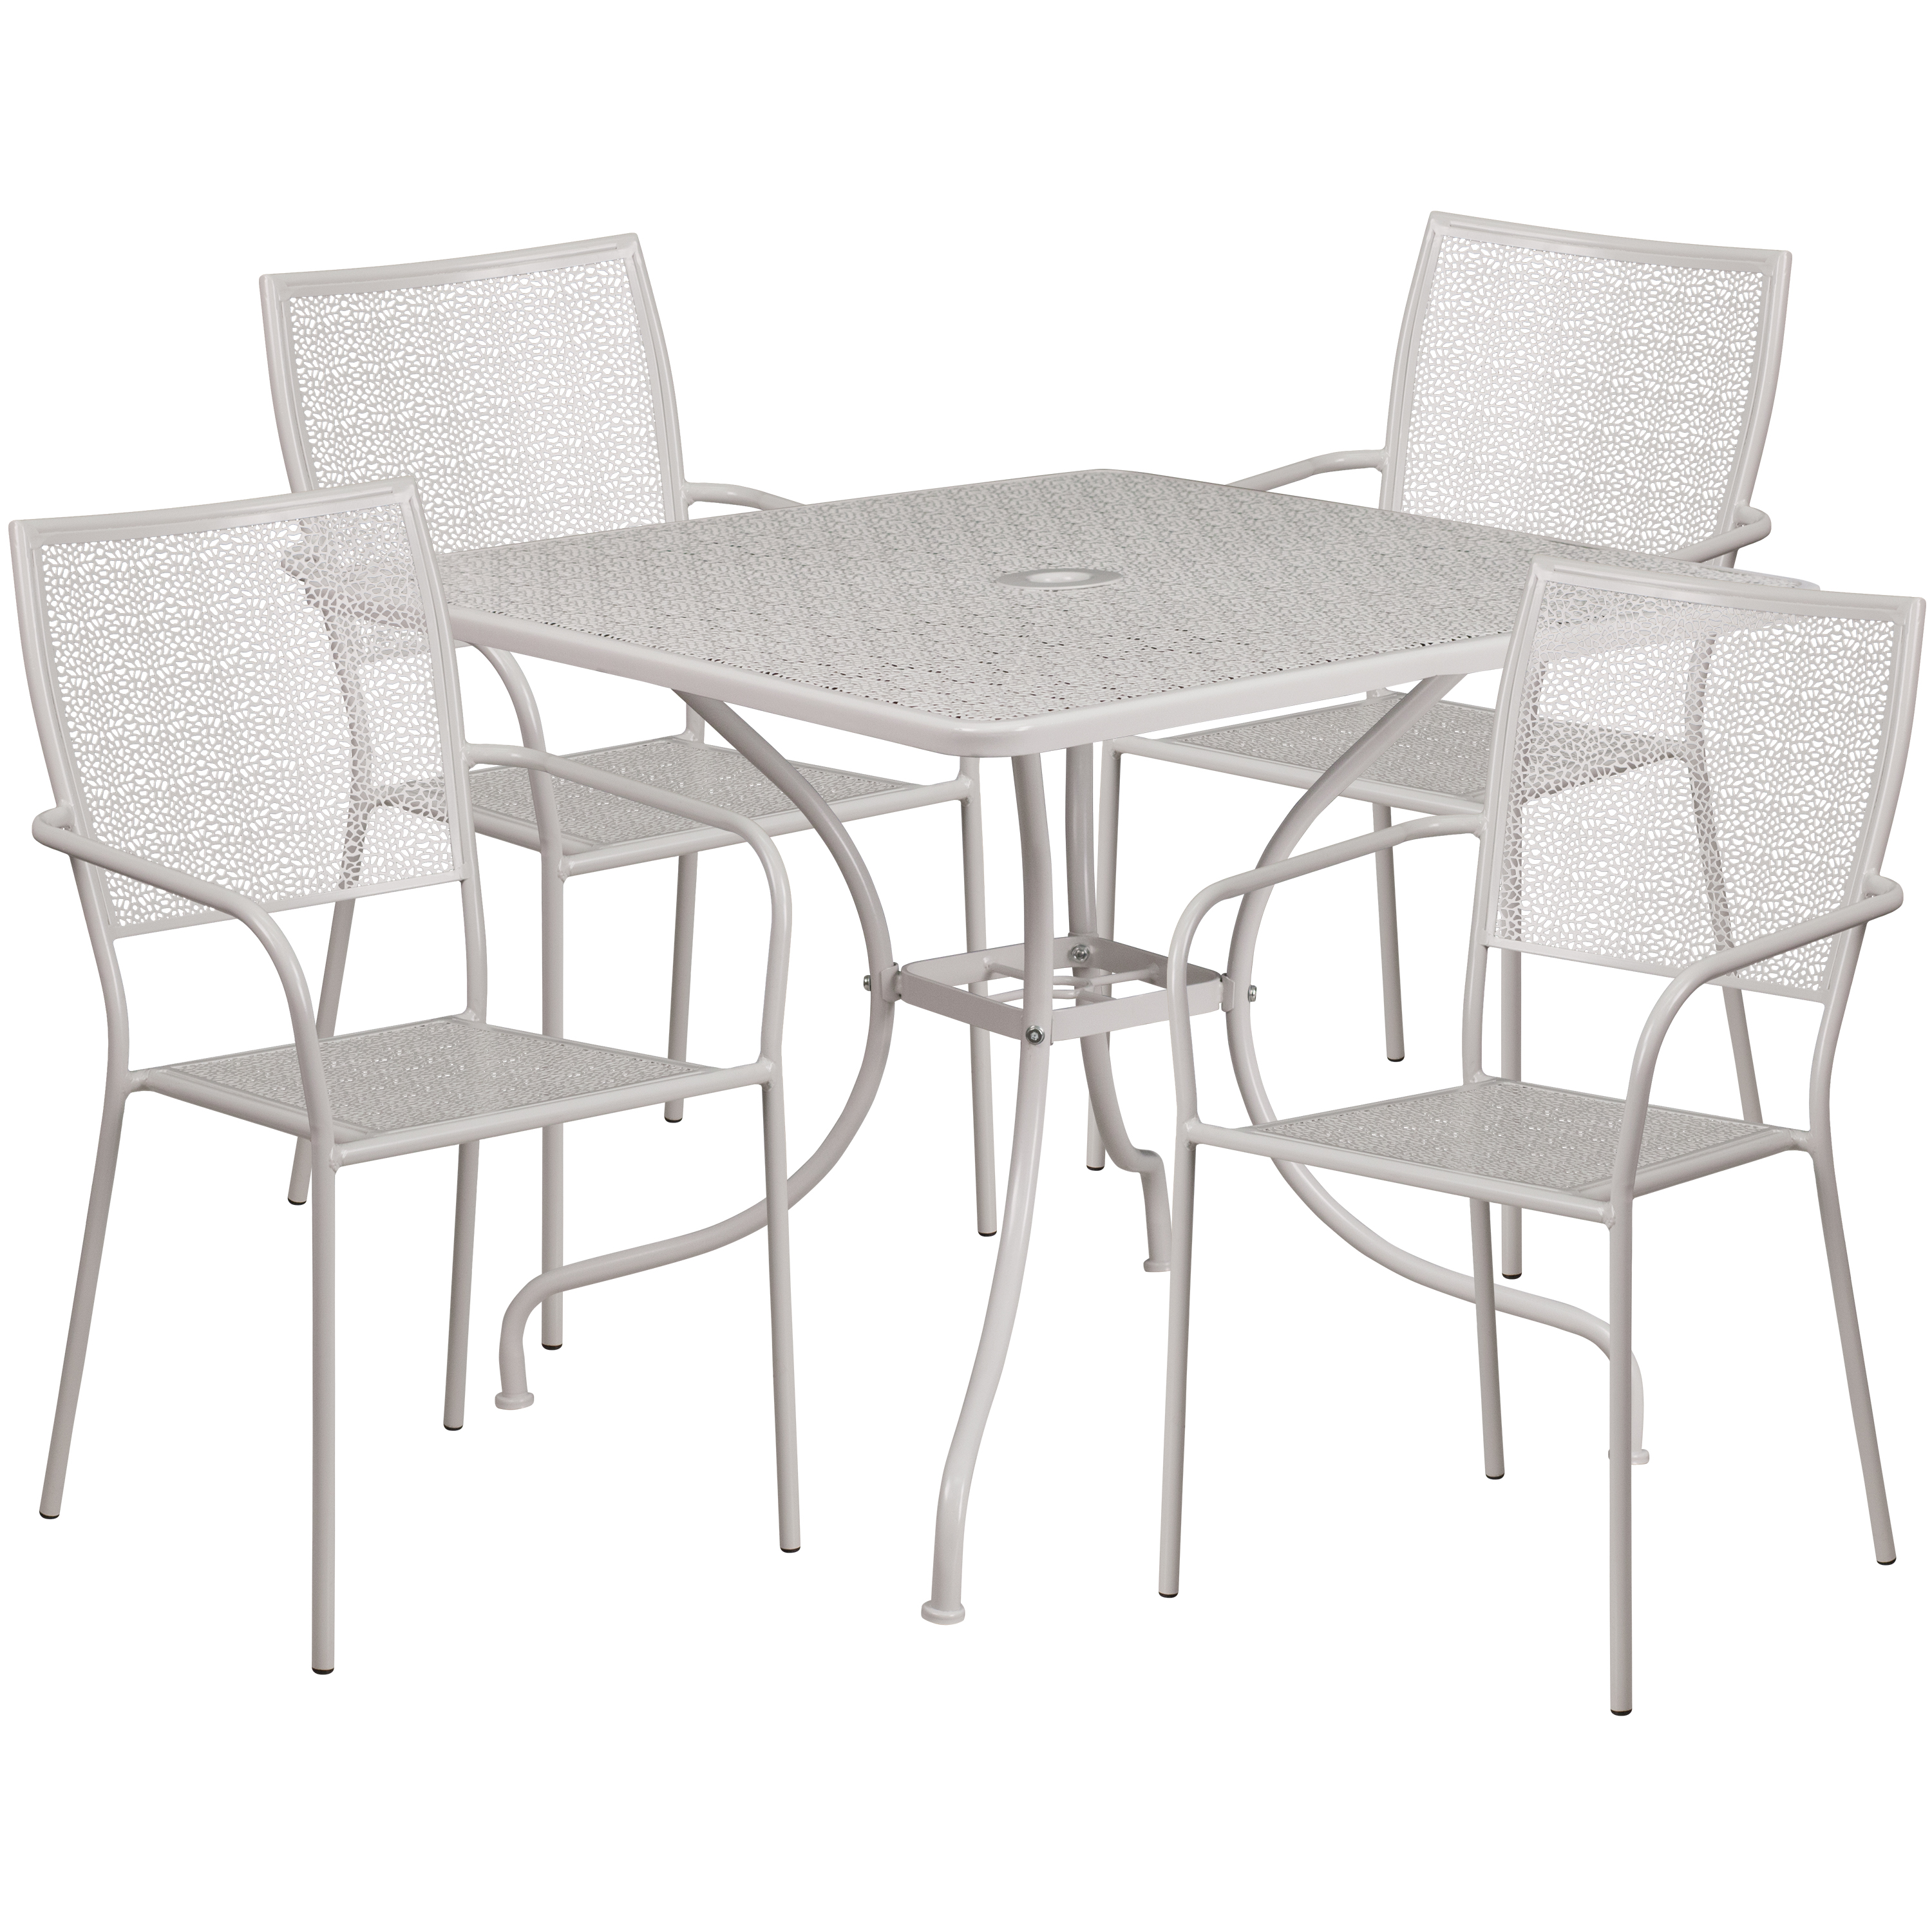 Flash Furniture Oia Commercial Grade 35.5" Square Light Gray Indoor-Outdoor Steel Patio Table Set with 4 Square Back Chairs - image 1 of 5